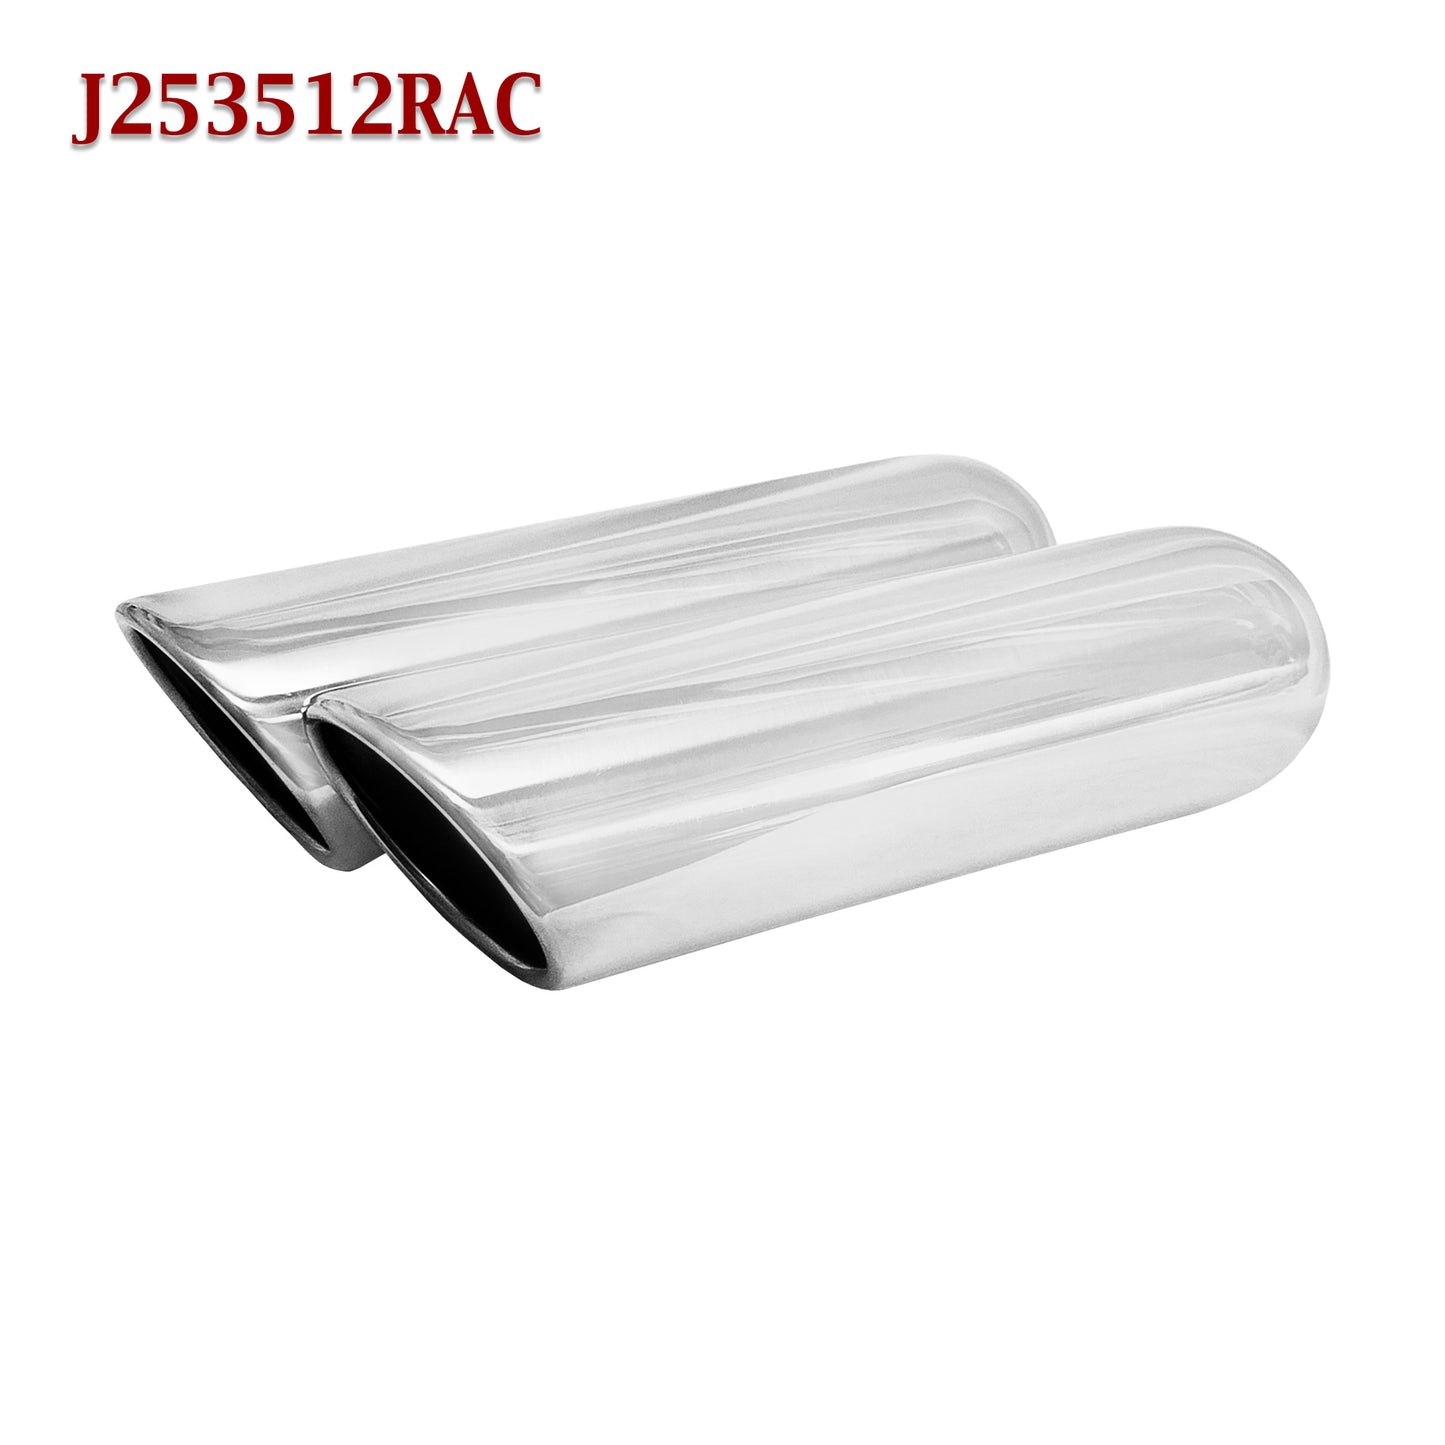 J253512RAC 2.5" Stainless Round Truck Exhaust Tip 2 1/2" In 3 1/2" Out 12" Long